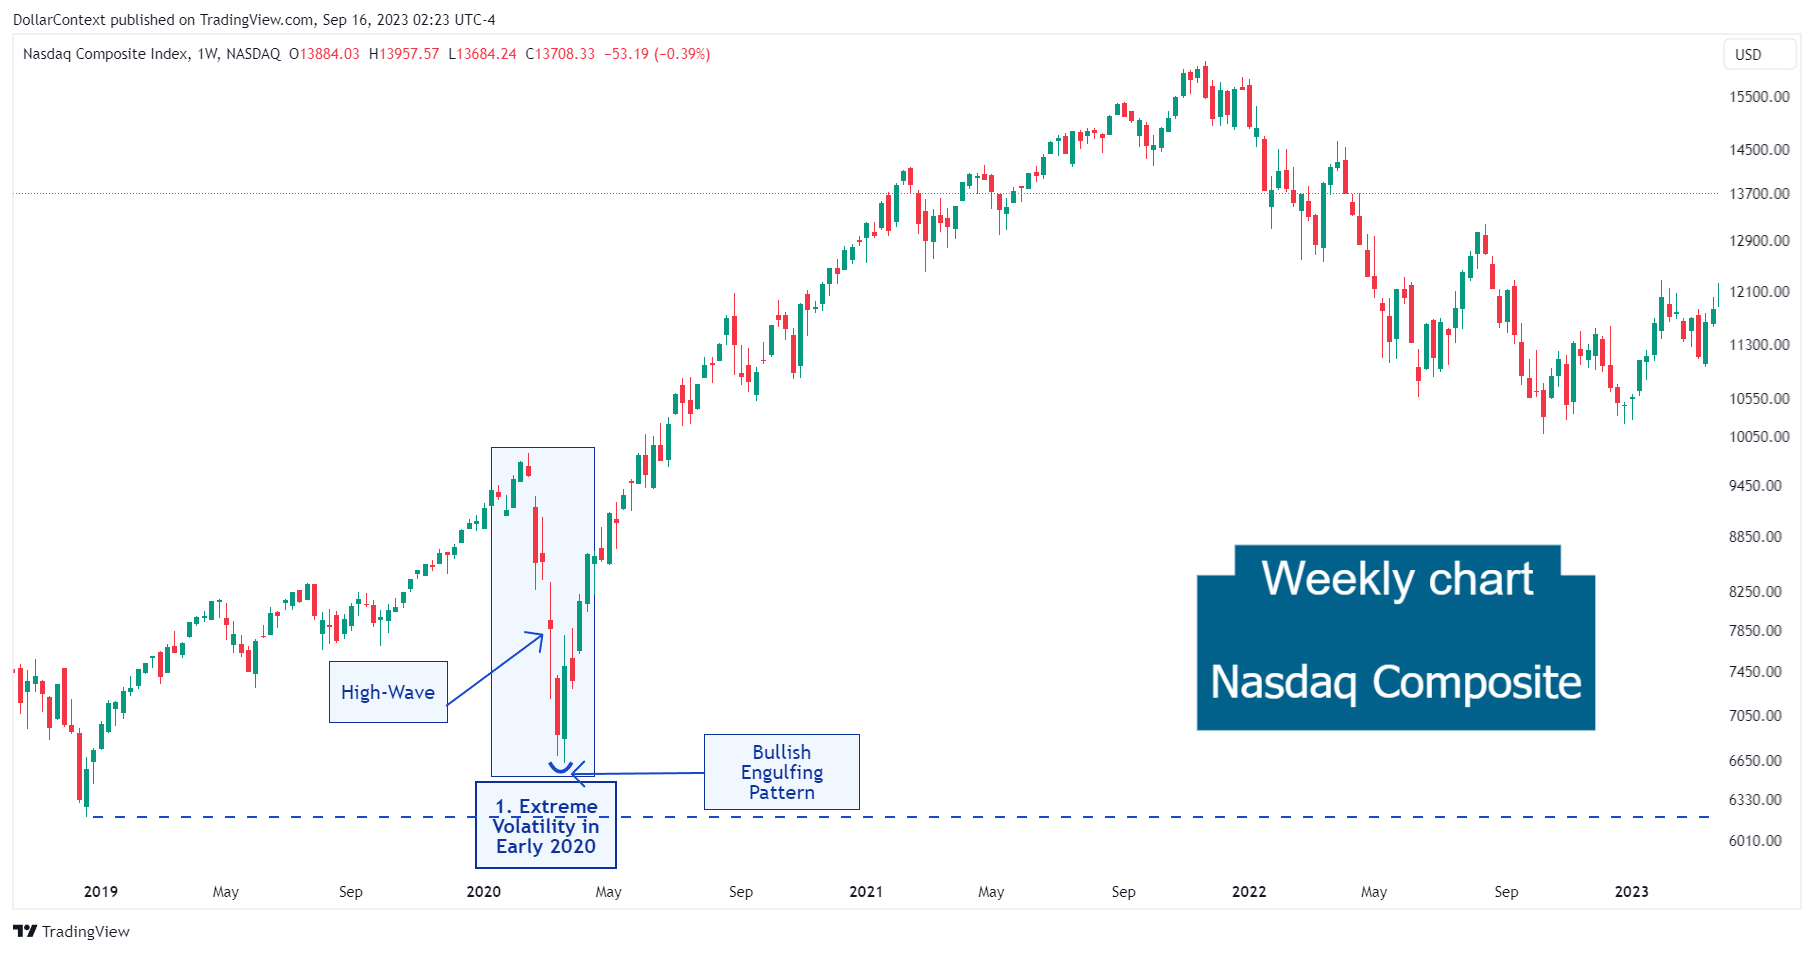 Nasdaq Composite: Intense Market Fluctuations in Early 2020 (Weekly Chart)